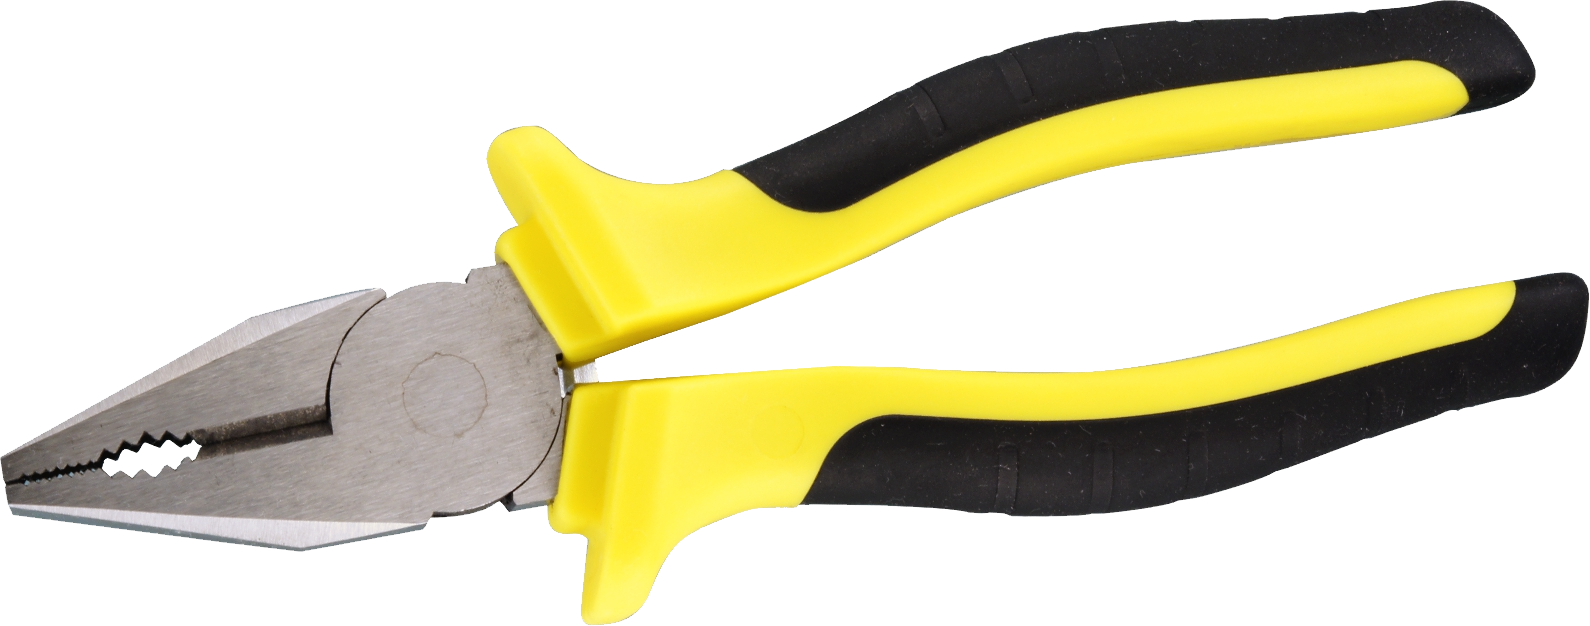 Plier PNG image, Pliers HD PNG - Free PNG